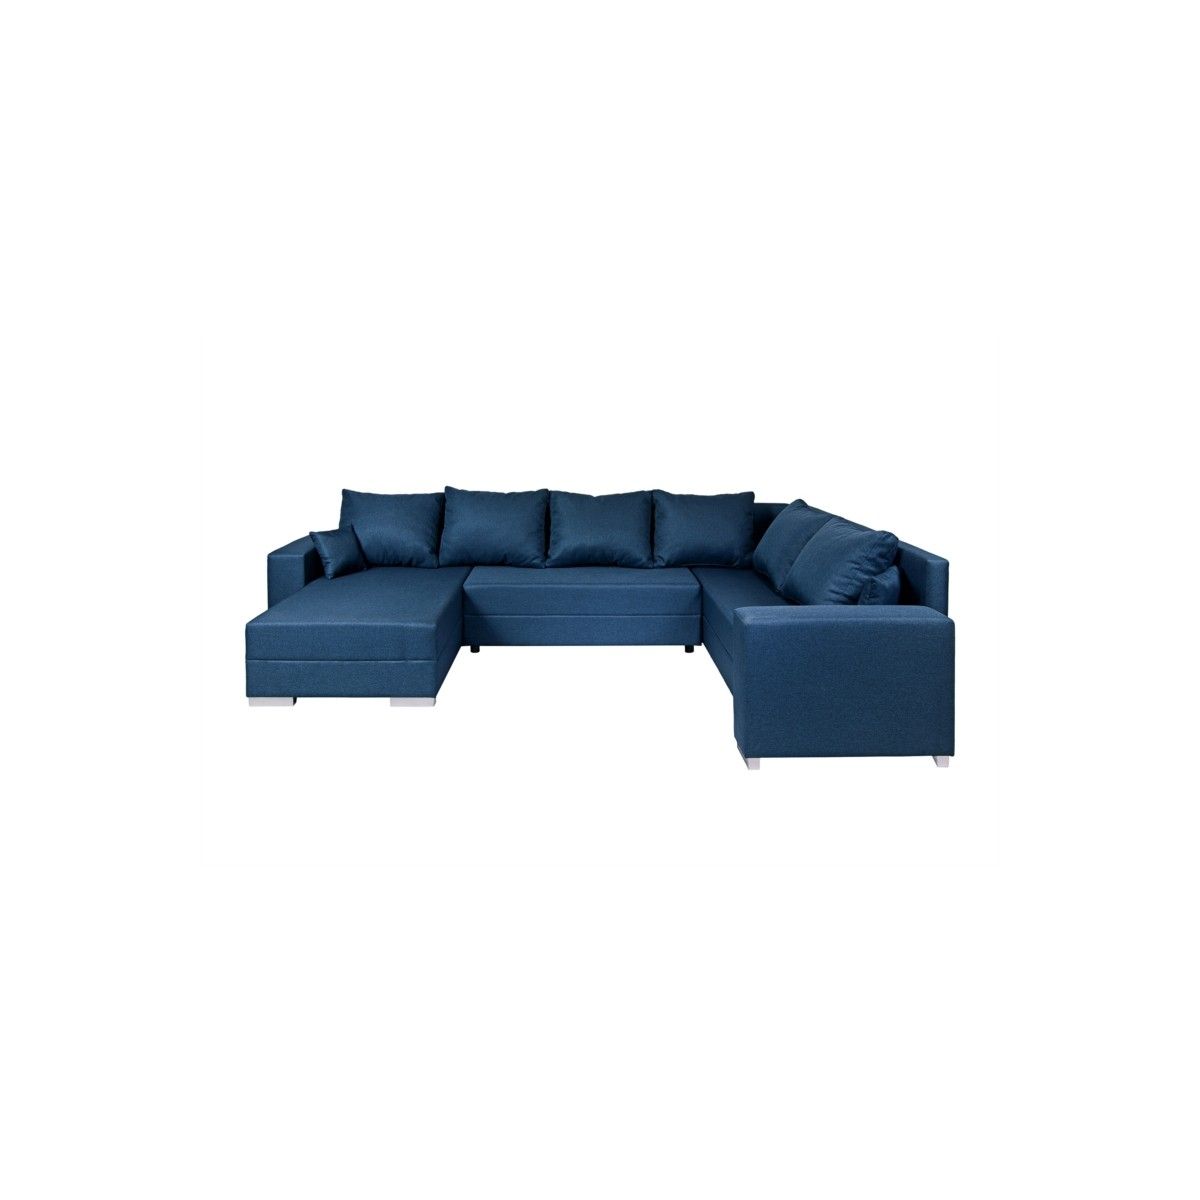 Convertible Corner Sofa 4 Places Fabric Right Angle Stela Oil Blue – Amp  Story 8647 Pertaining To 8 Seat Convertible Sofas (View 4 of 15)